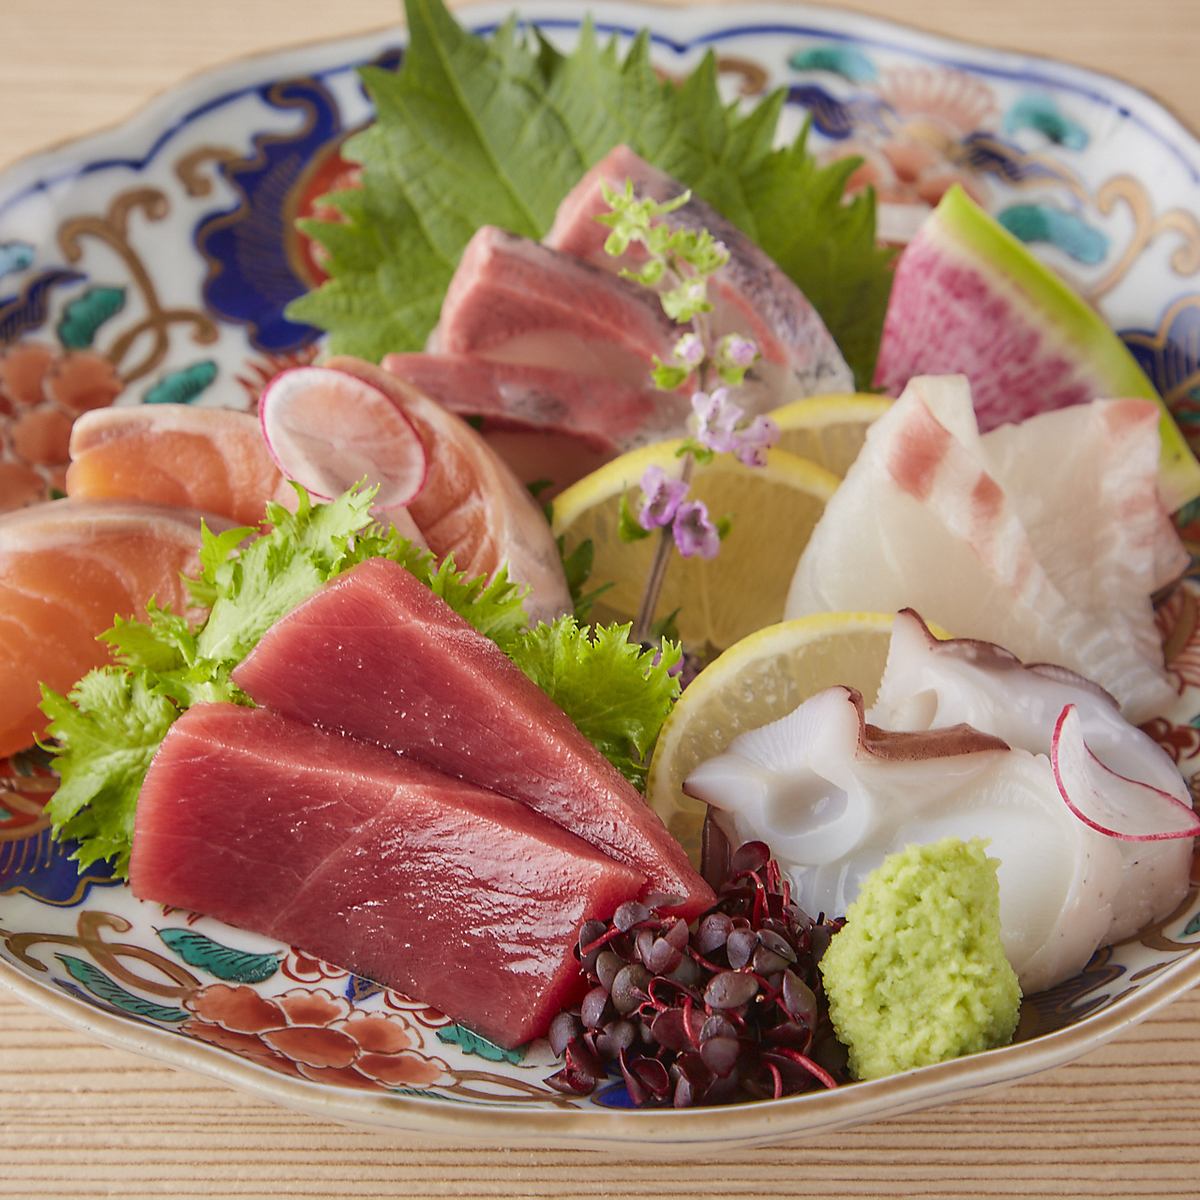 An authentic sushi bar run by a former chef has landed in Hakata for the first time!!